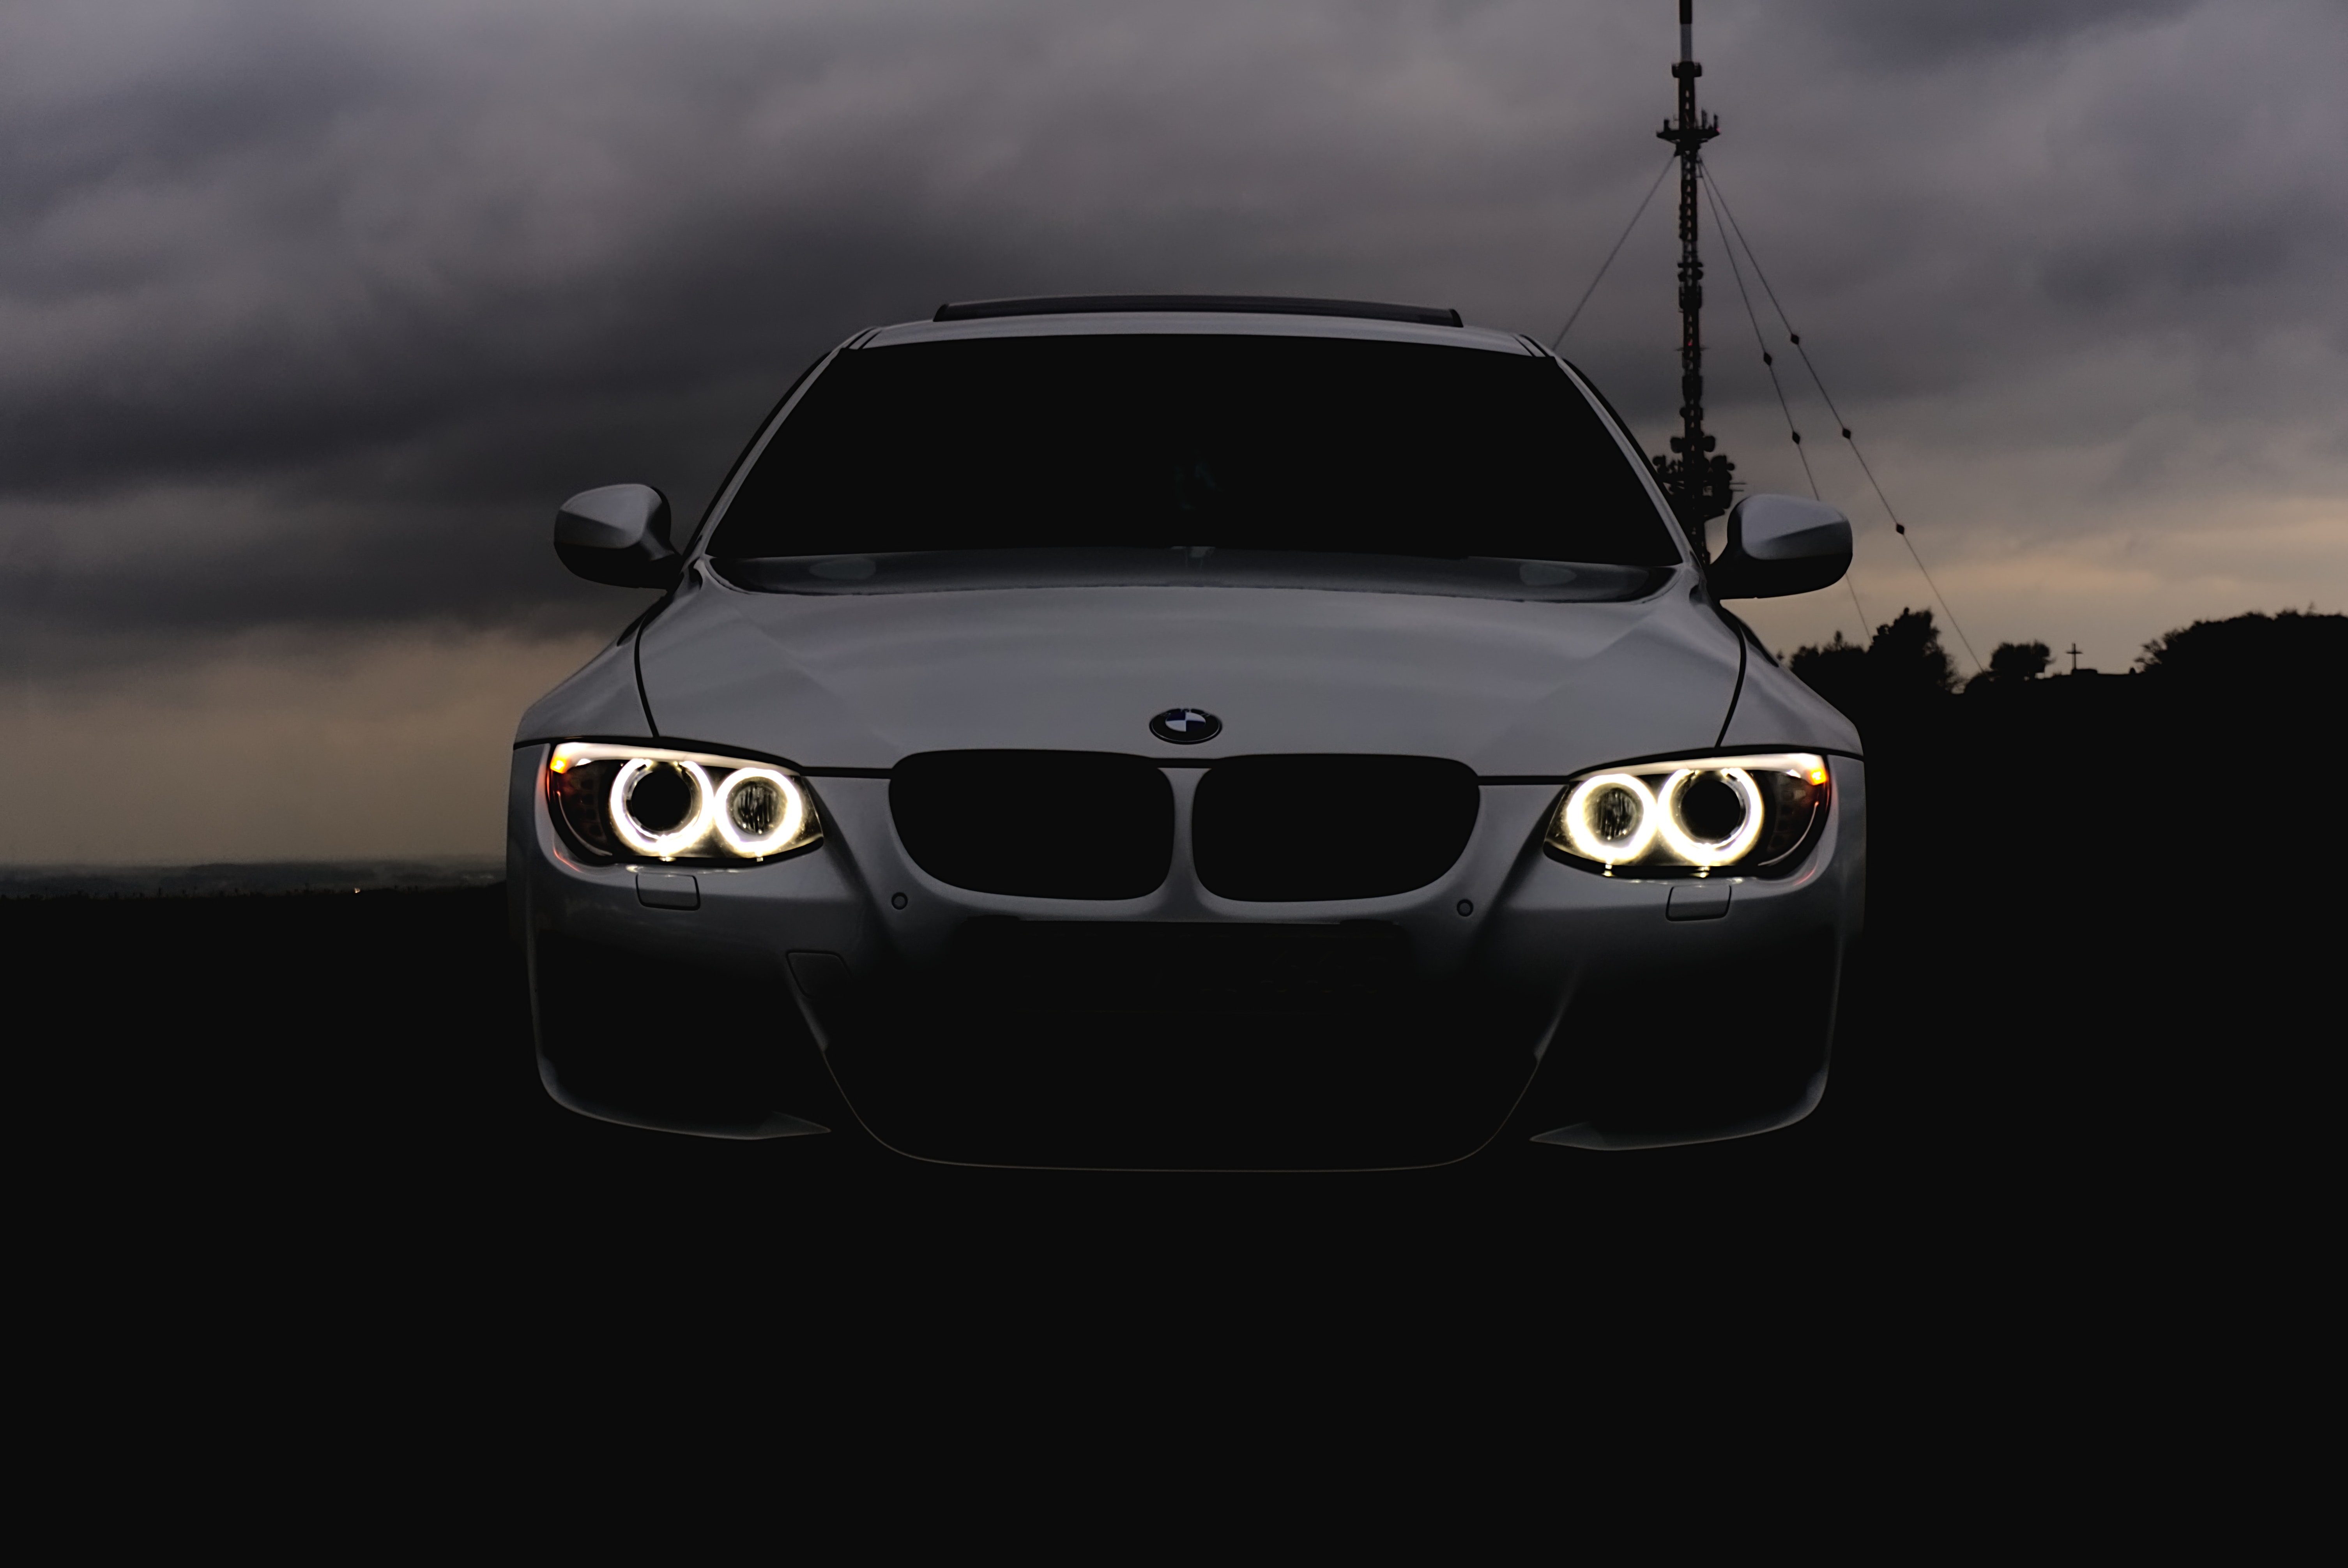 1920 x 1080 picture car, bmw, cars, clouds, lights, mainly cloudy, overcast, headlights